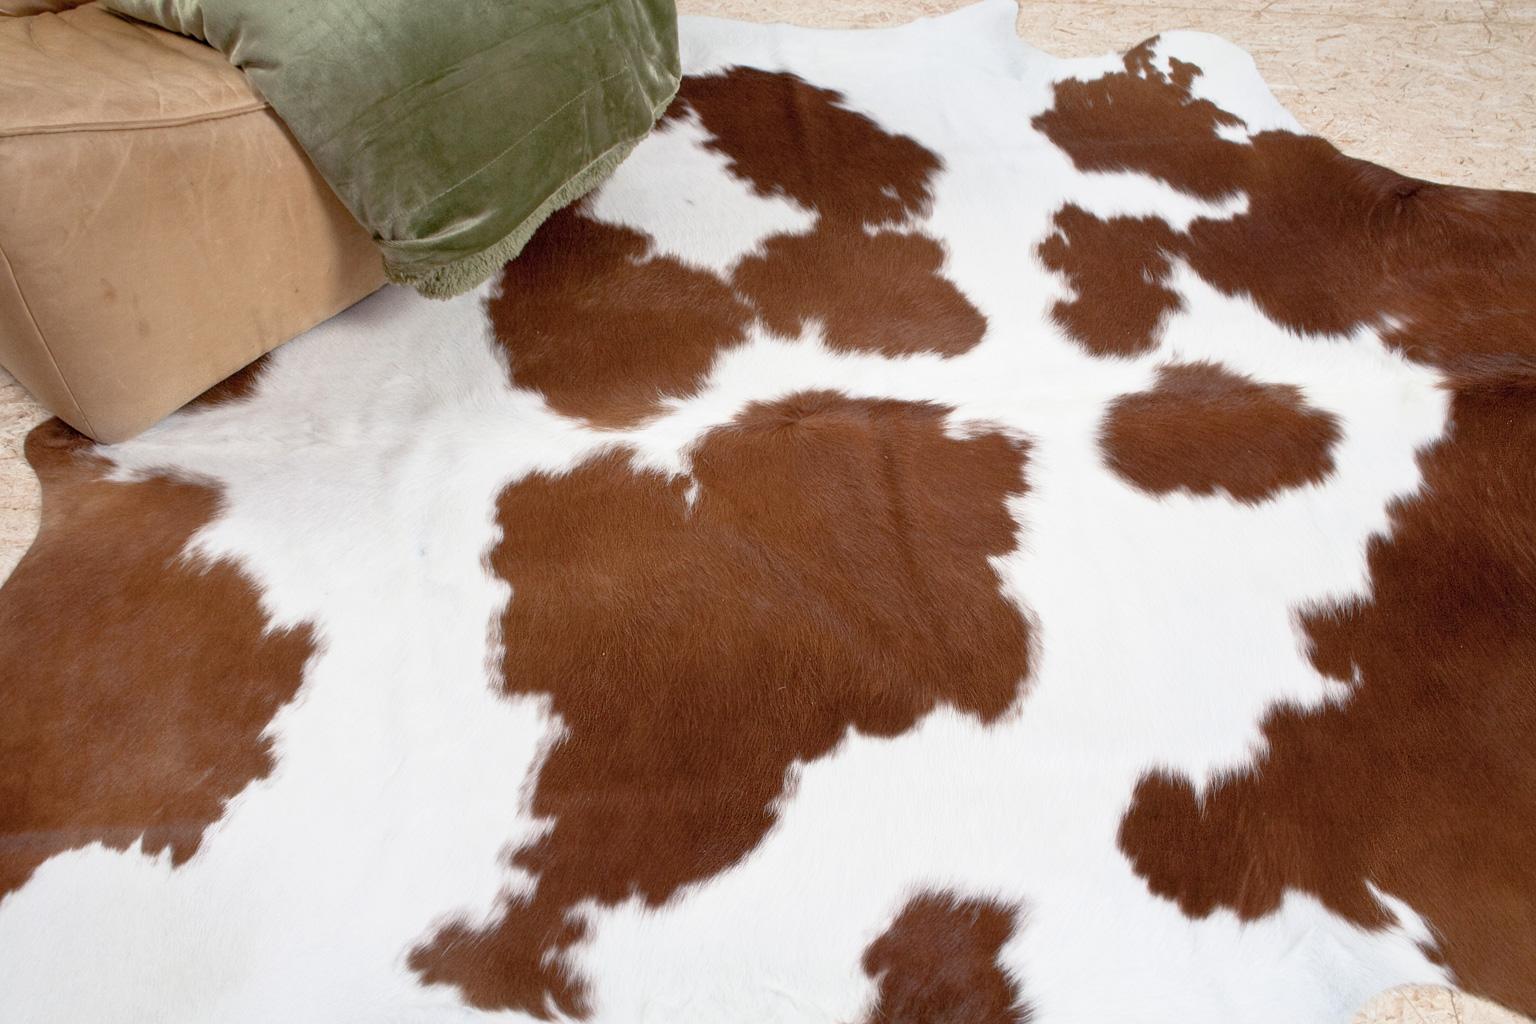 Contemporary Organic Modern Natural White and Brown Cowhide or Rug, Dutch Cattle, 2018